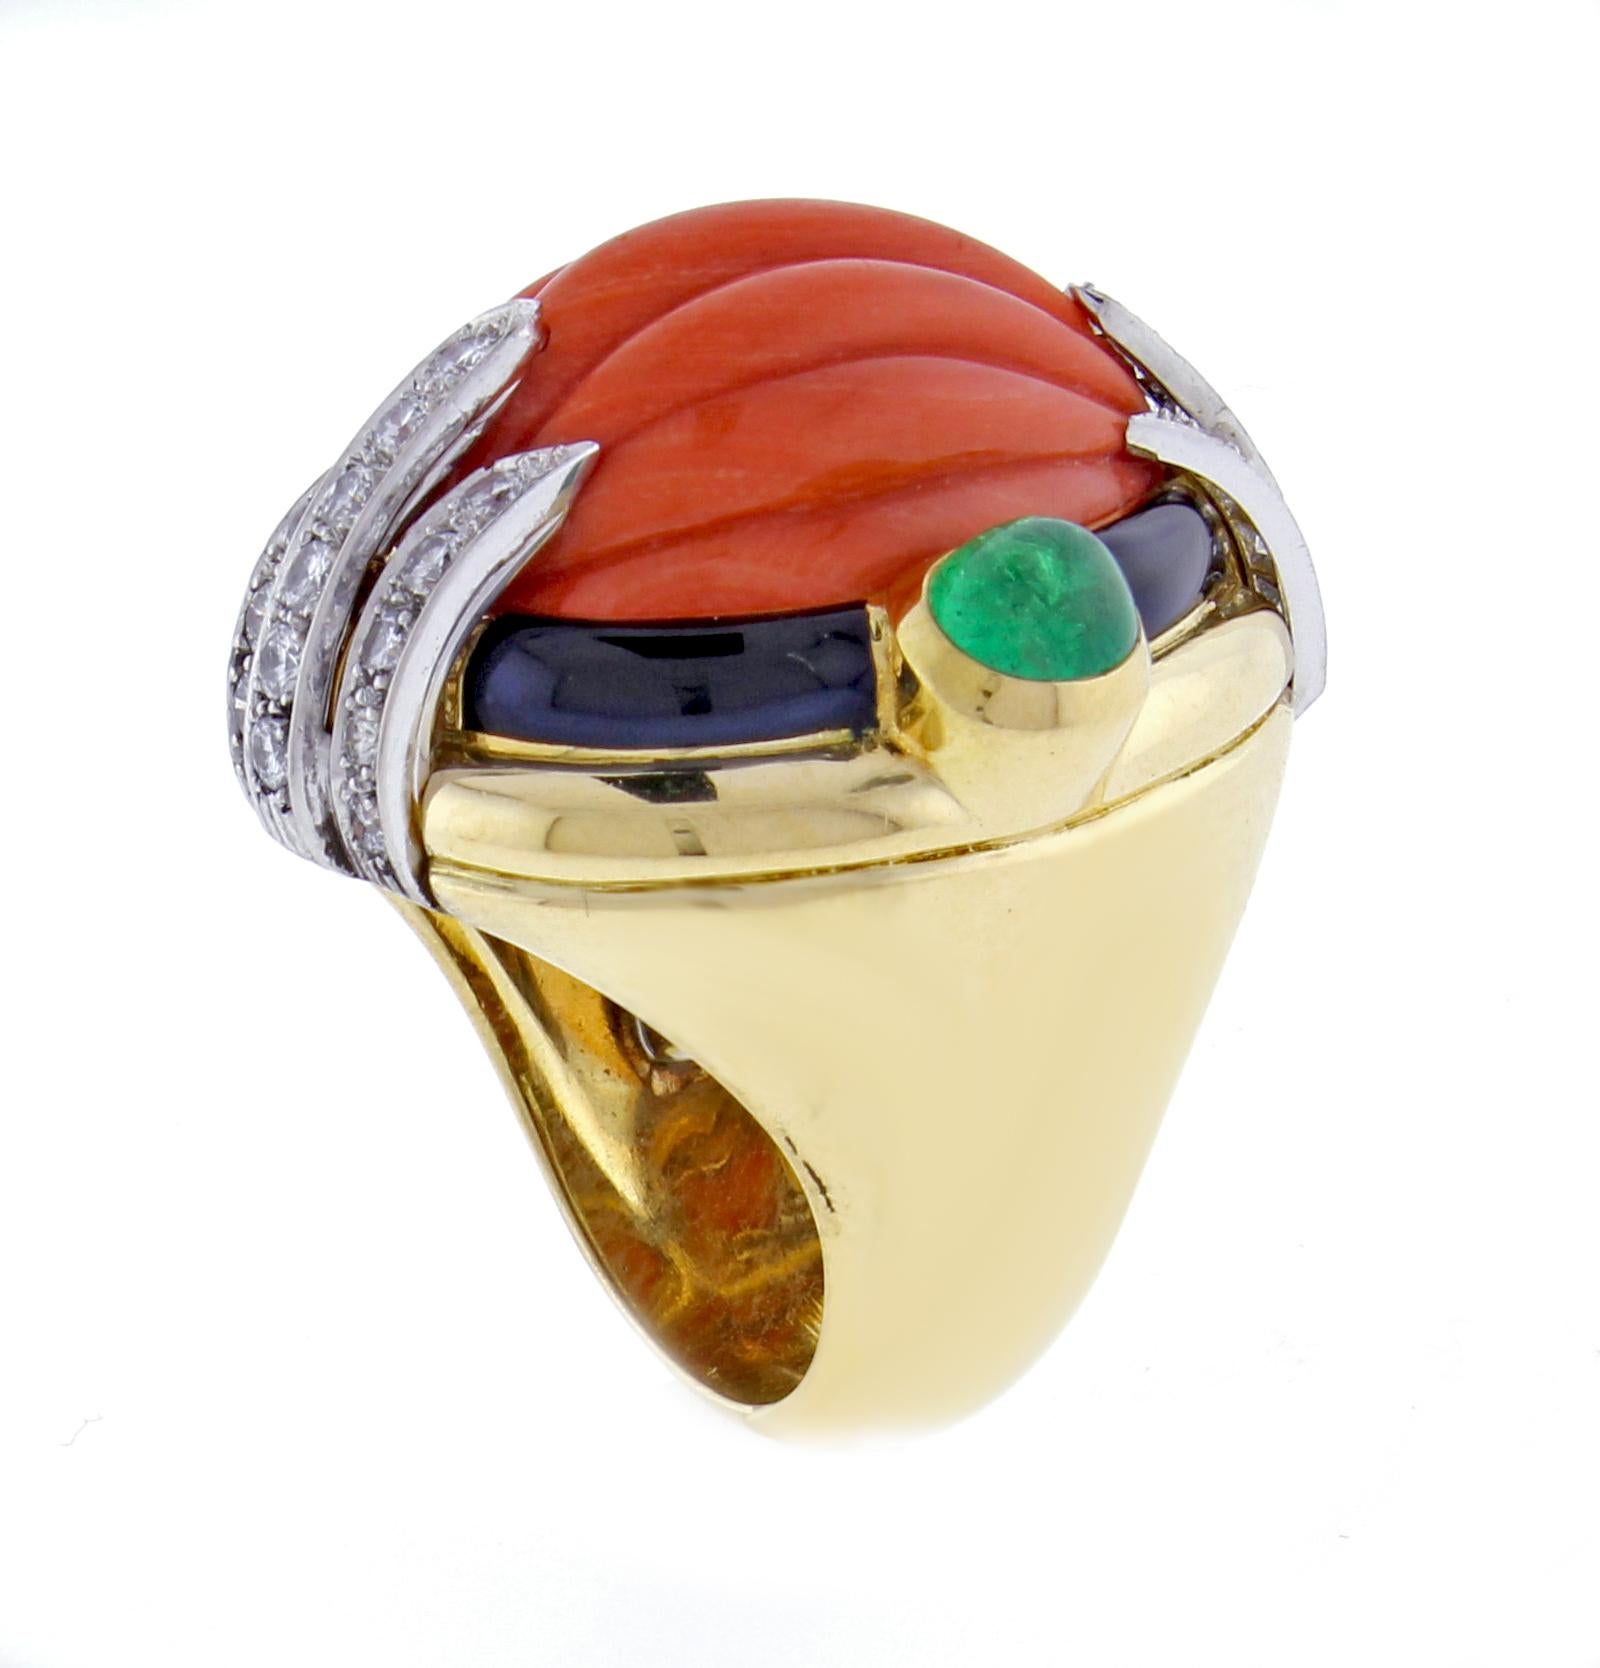 From David Webb, this magnificent carved coral ring.  The ring boasts a center carved salmon coral in a black enamel frame. There are two cabochon emeralds weighing approximately 1.70 carats on ether side and three section of diamonds. The 29